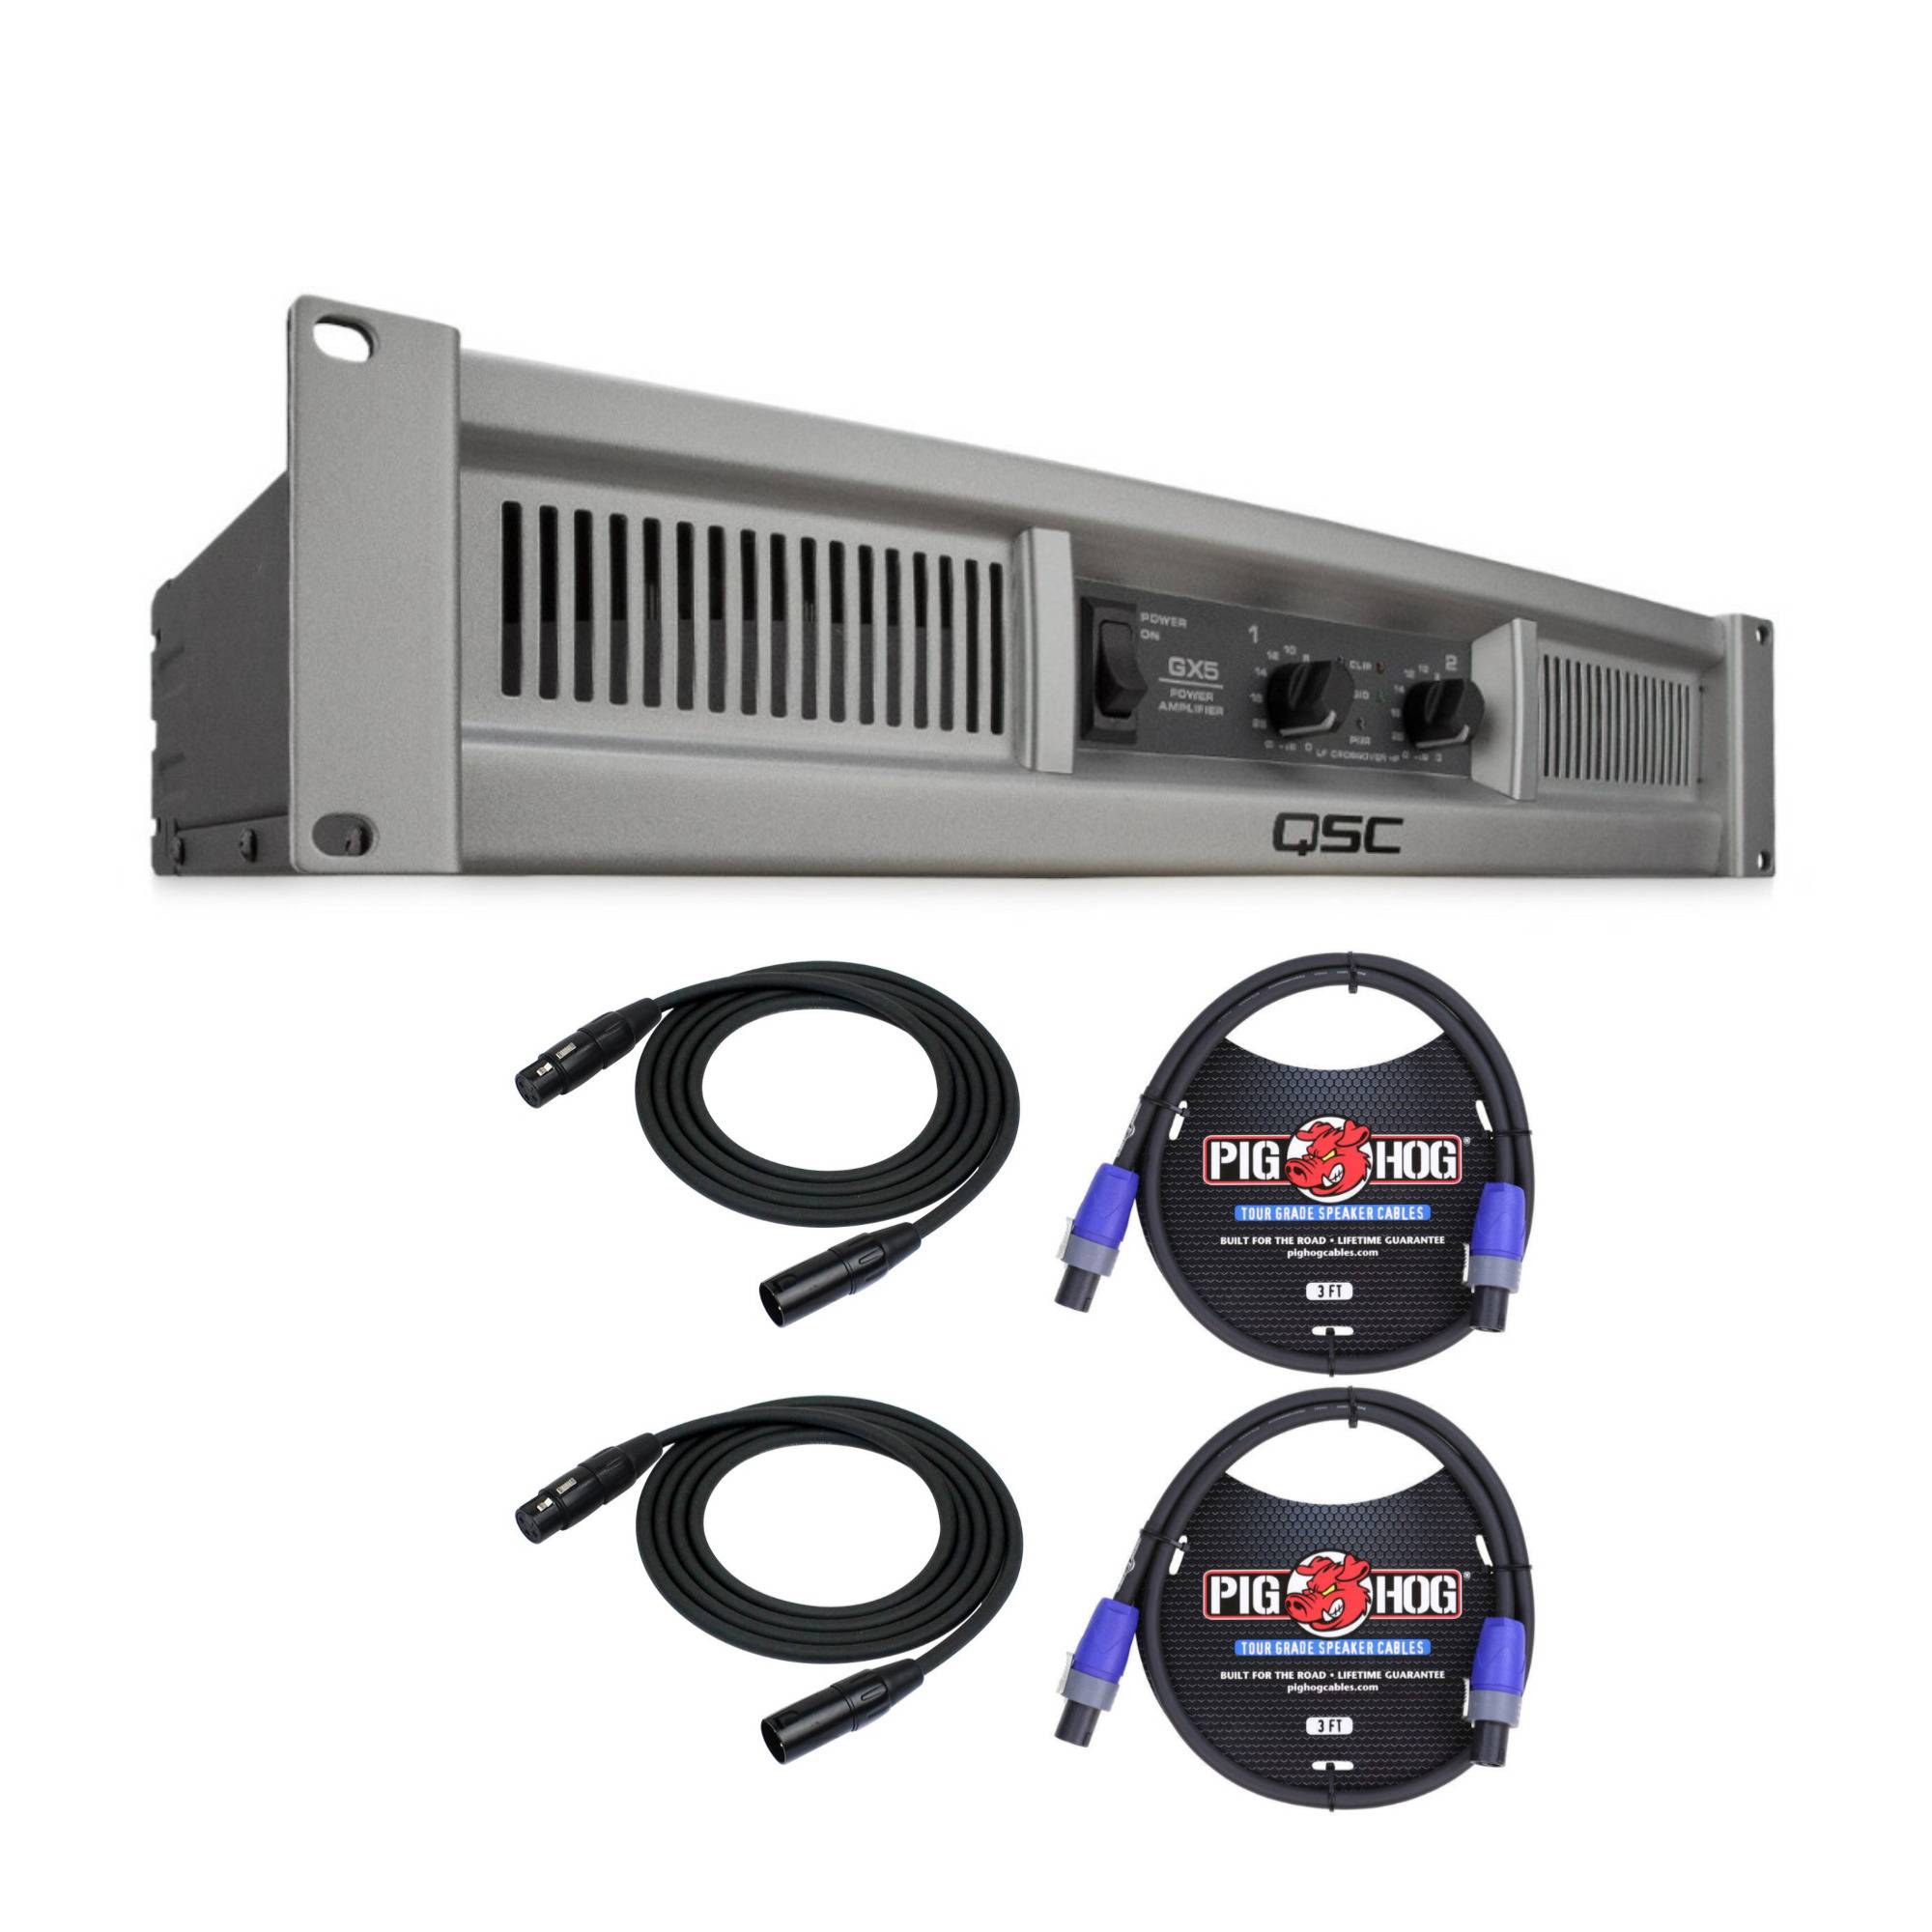 QSC GX5 500 Watt 8 Ohm Power Amplifier with XLR Cables (2) and Speakon Cables (2)